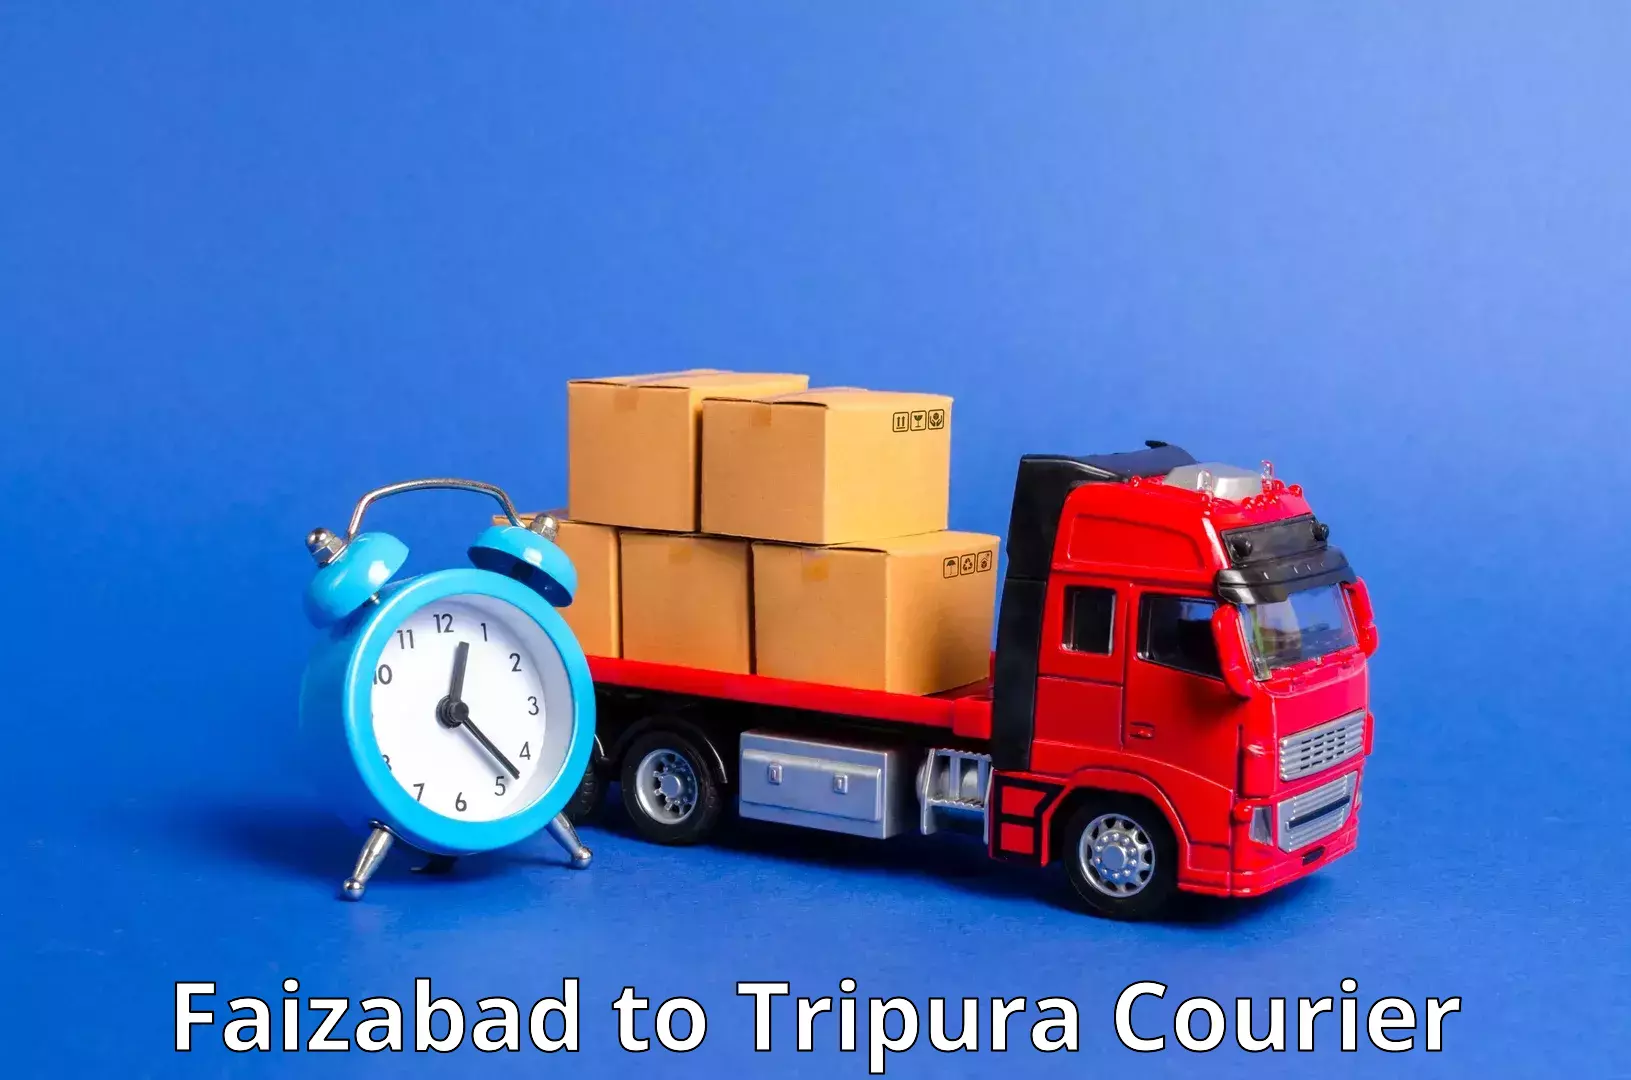 Courier service booking Faizabad to Udaipur Tripura